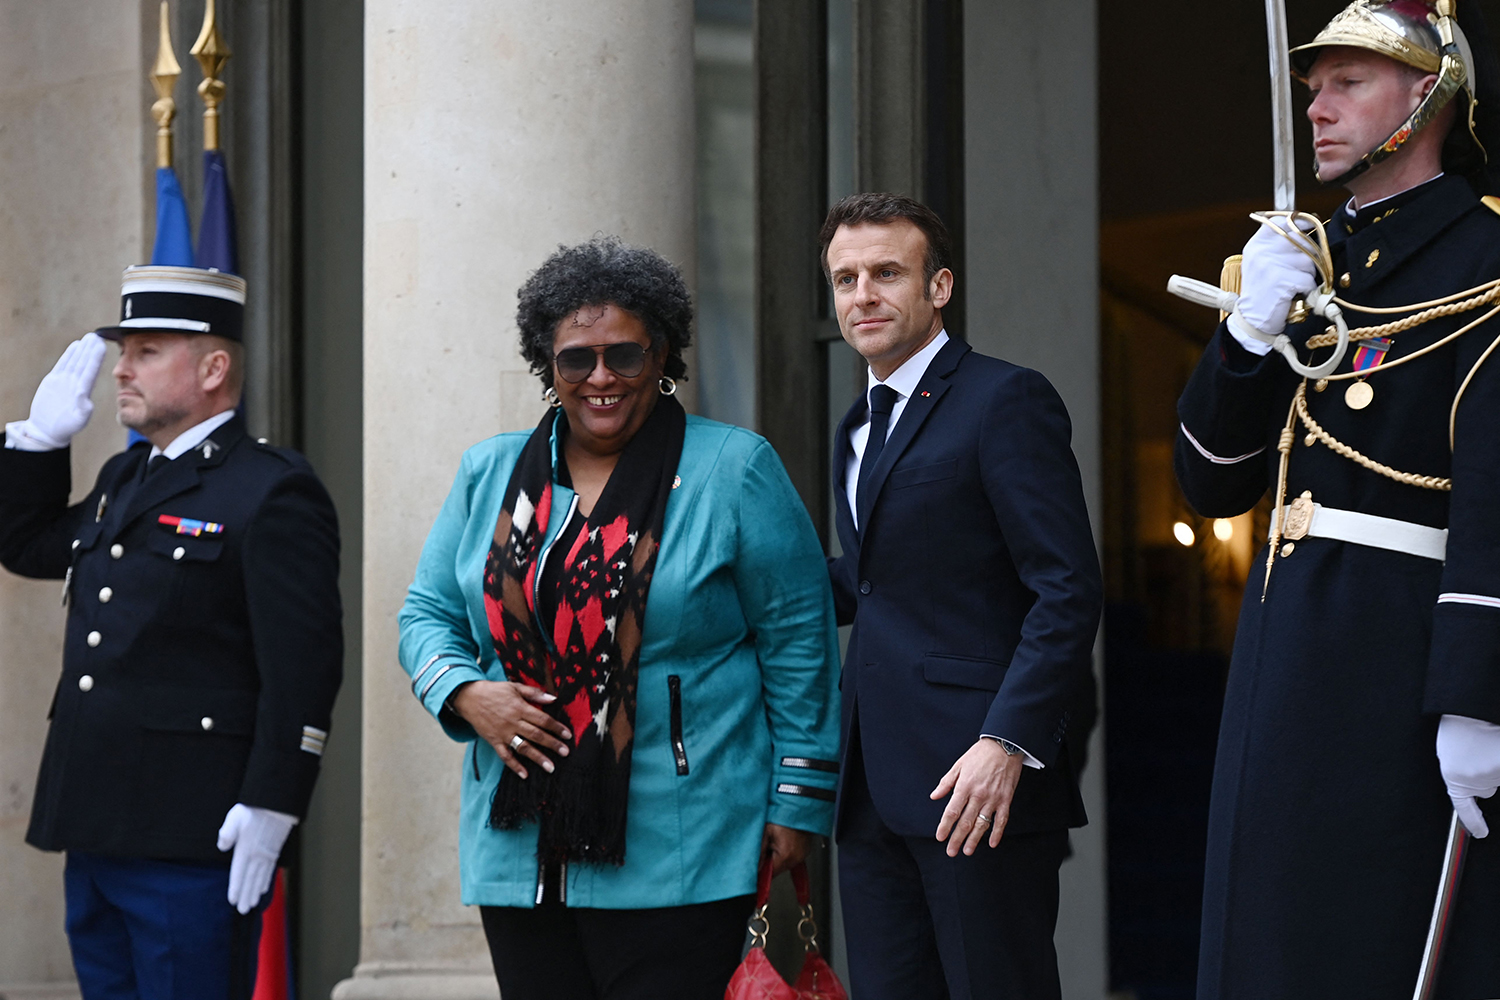 French President Emmanuel Macron, wearing a dark suit and tie, welcomes Mia Mottley, the prime minister of Barbados, wearing a teal jacket and colorful scarf, before a meeting in Paris. They are flanked by French guards in uniform.